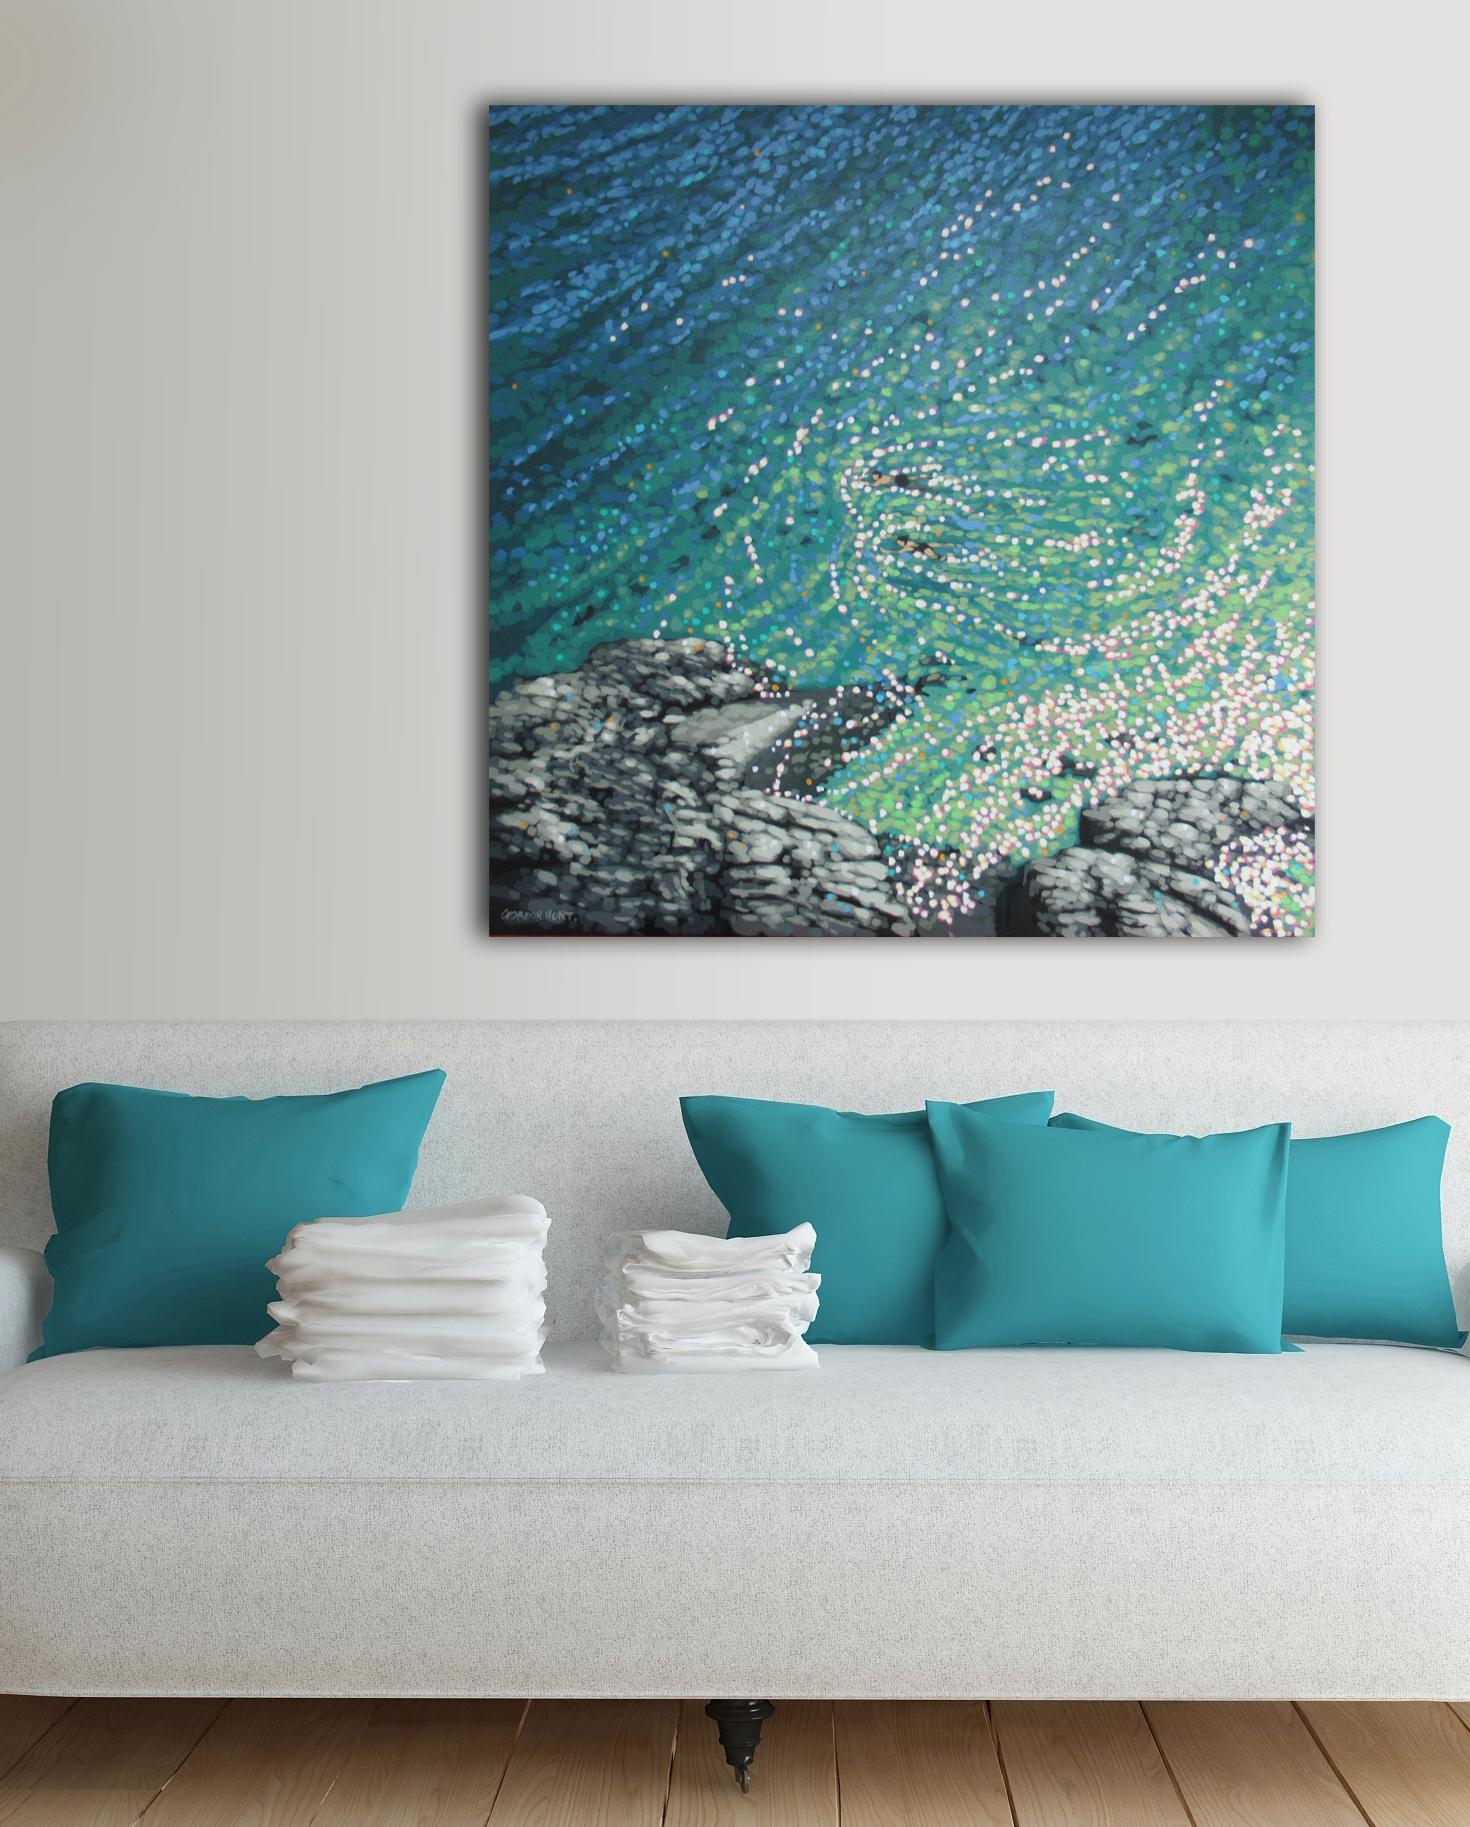 Cornwall Cove - Blue Abstract Painting by Gordon Hunt